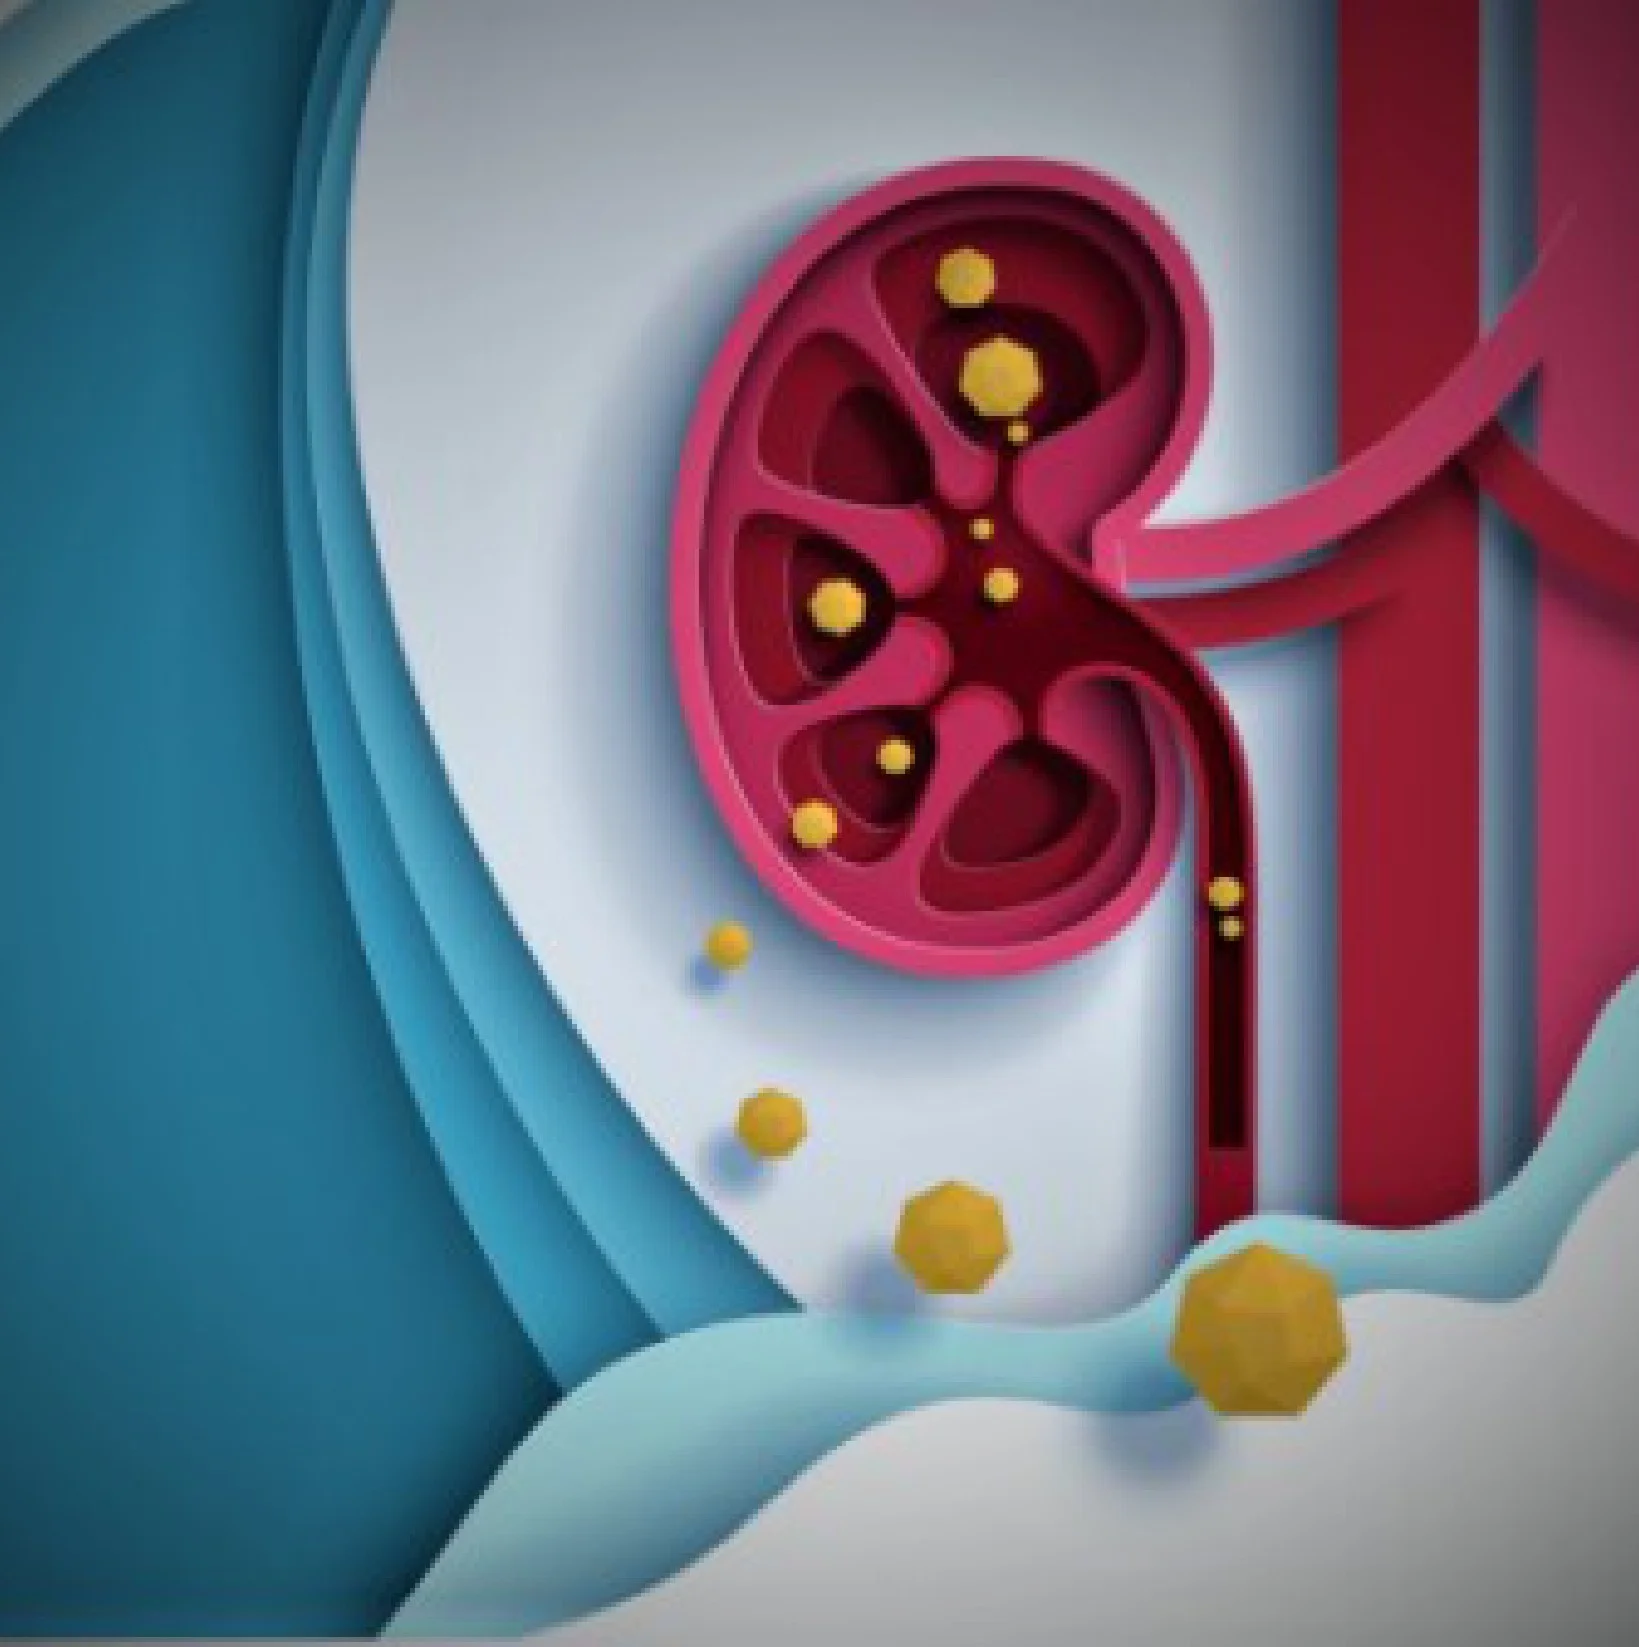 Best Treatment for Renal Stones at Gangasheel Hospital - Bareilly